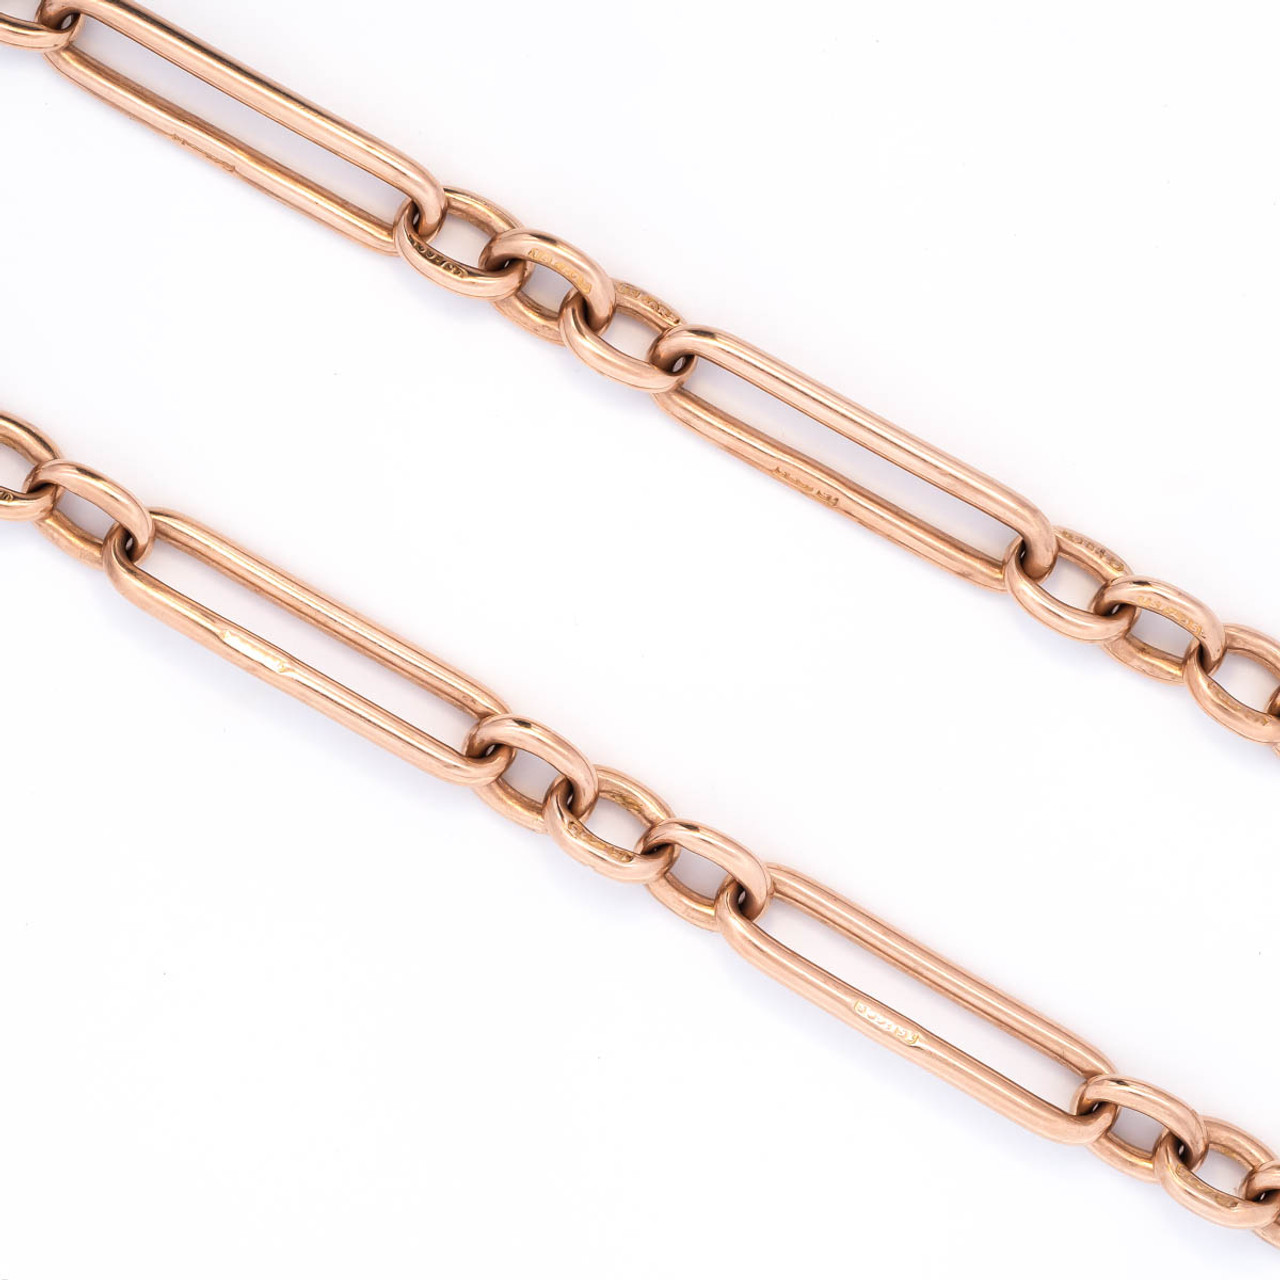 Late Victorian Watch Chain Link Necklace in Yellow and Rose Gold